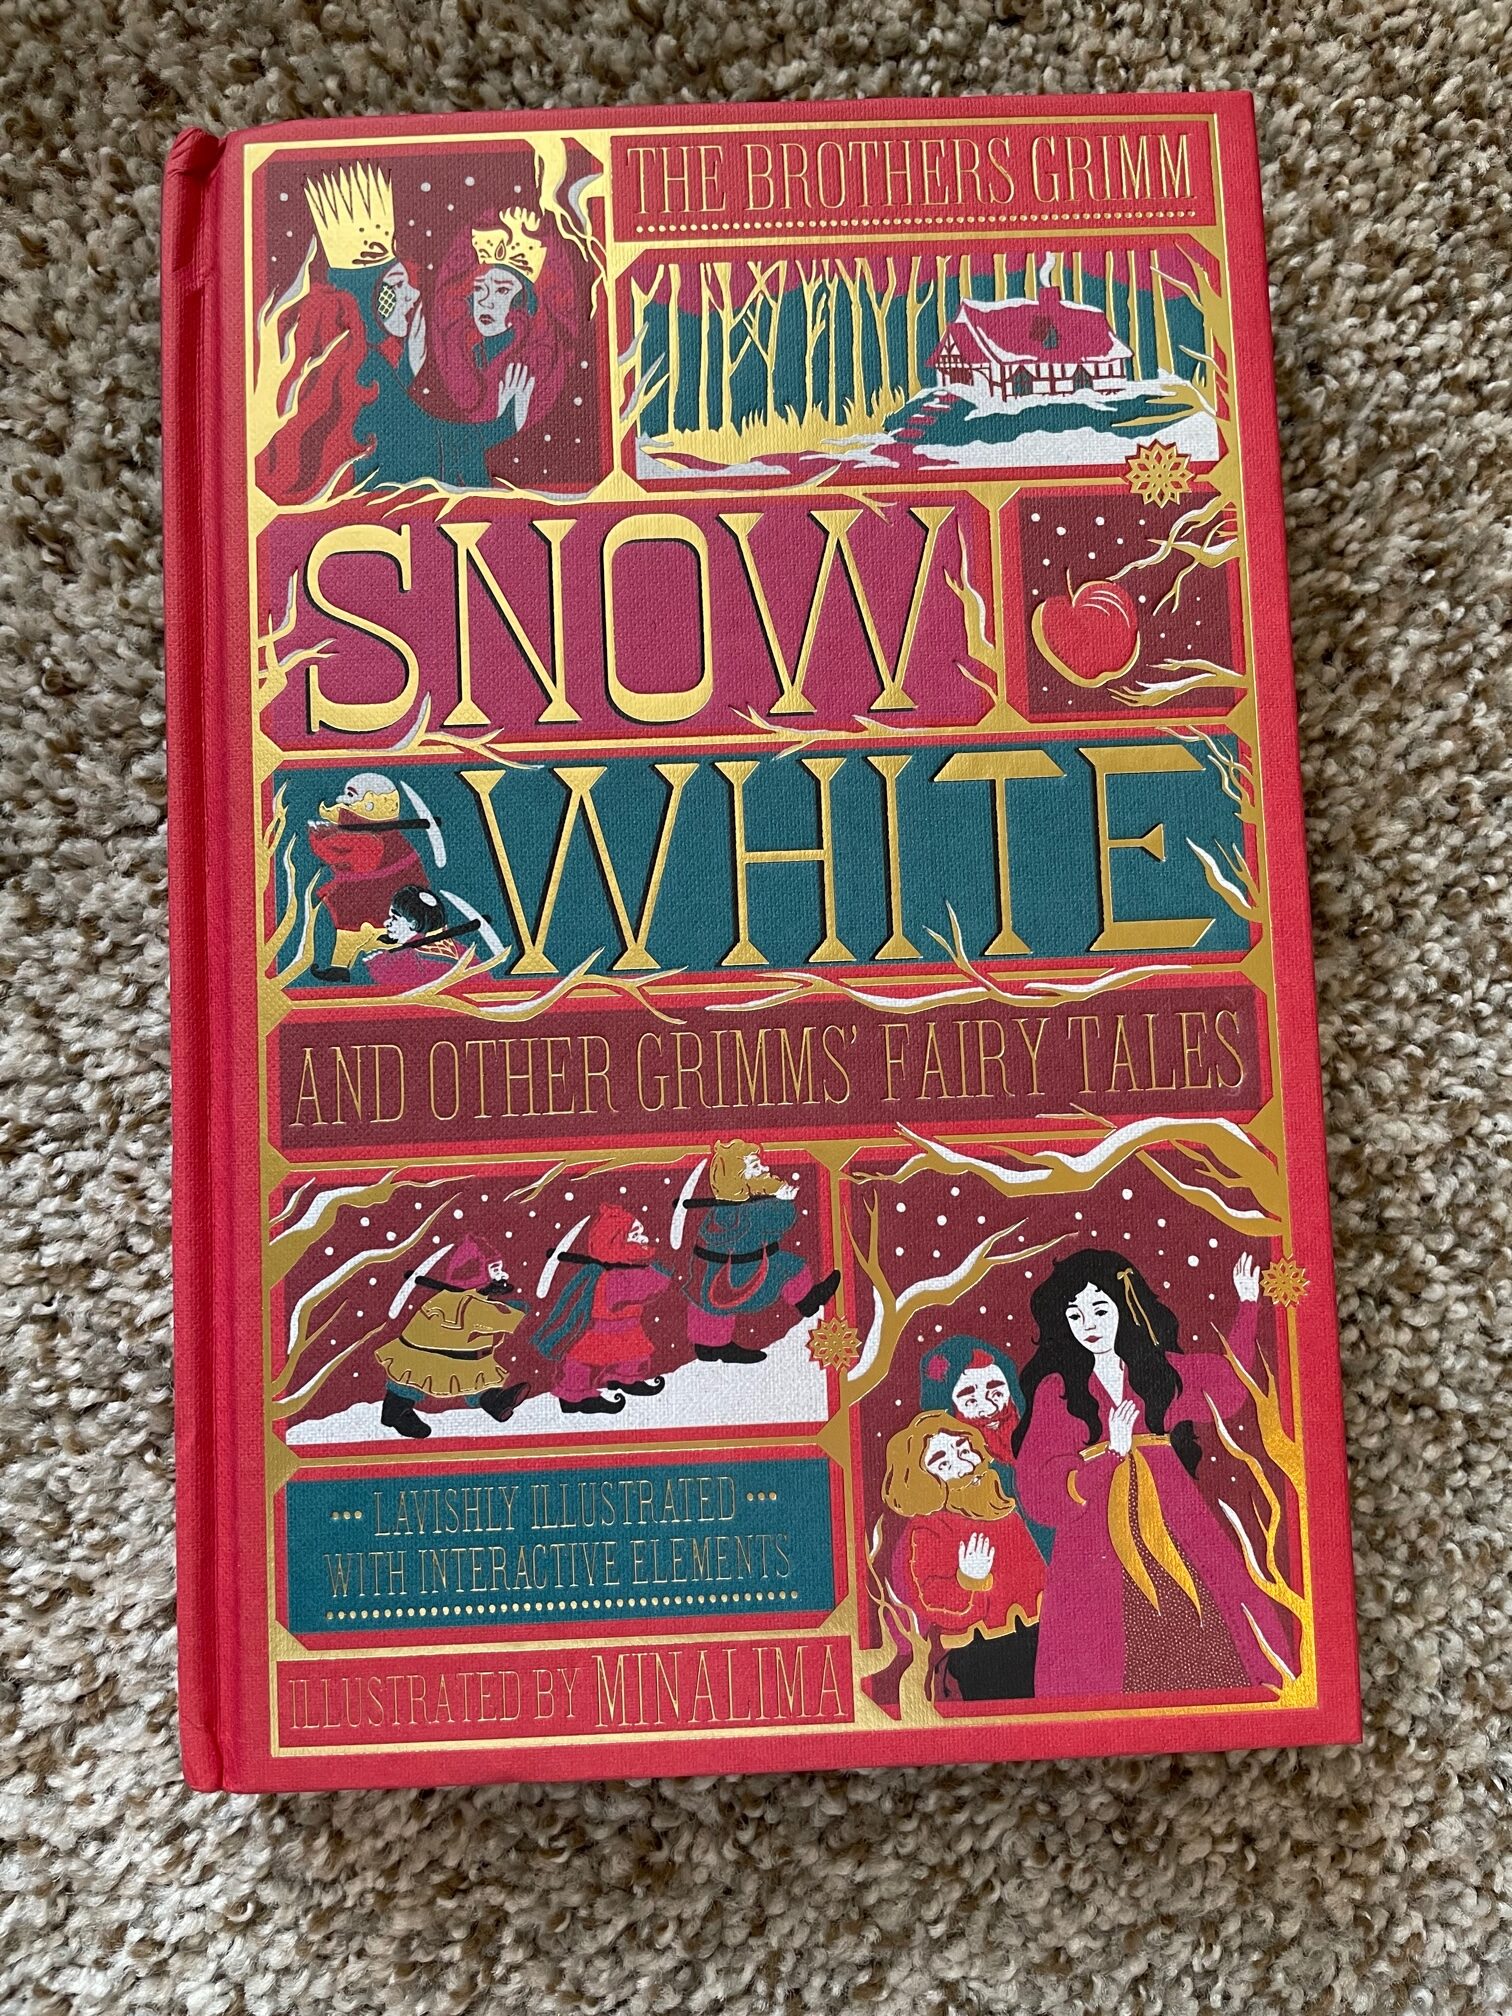 Cover of MinaLima's "Snow White and Other Grimms' Fairy Tales"